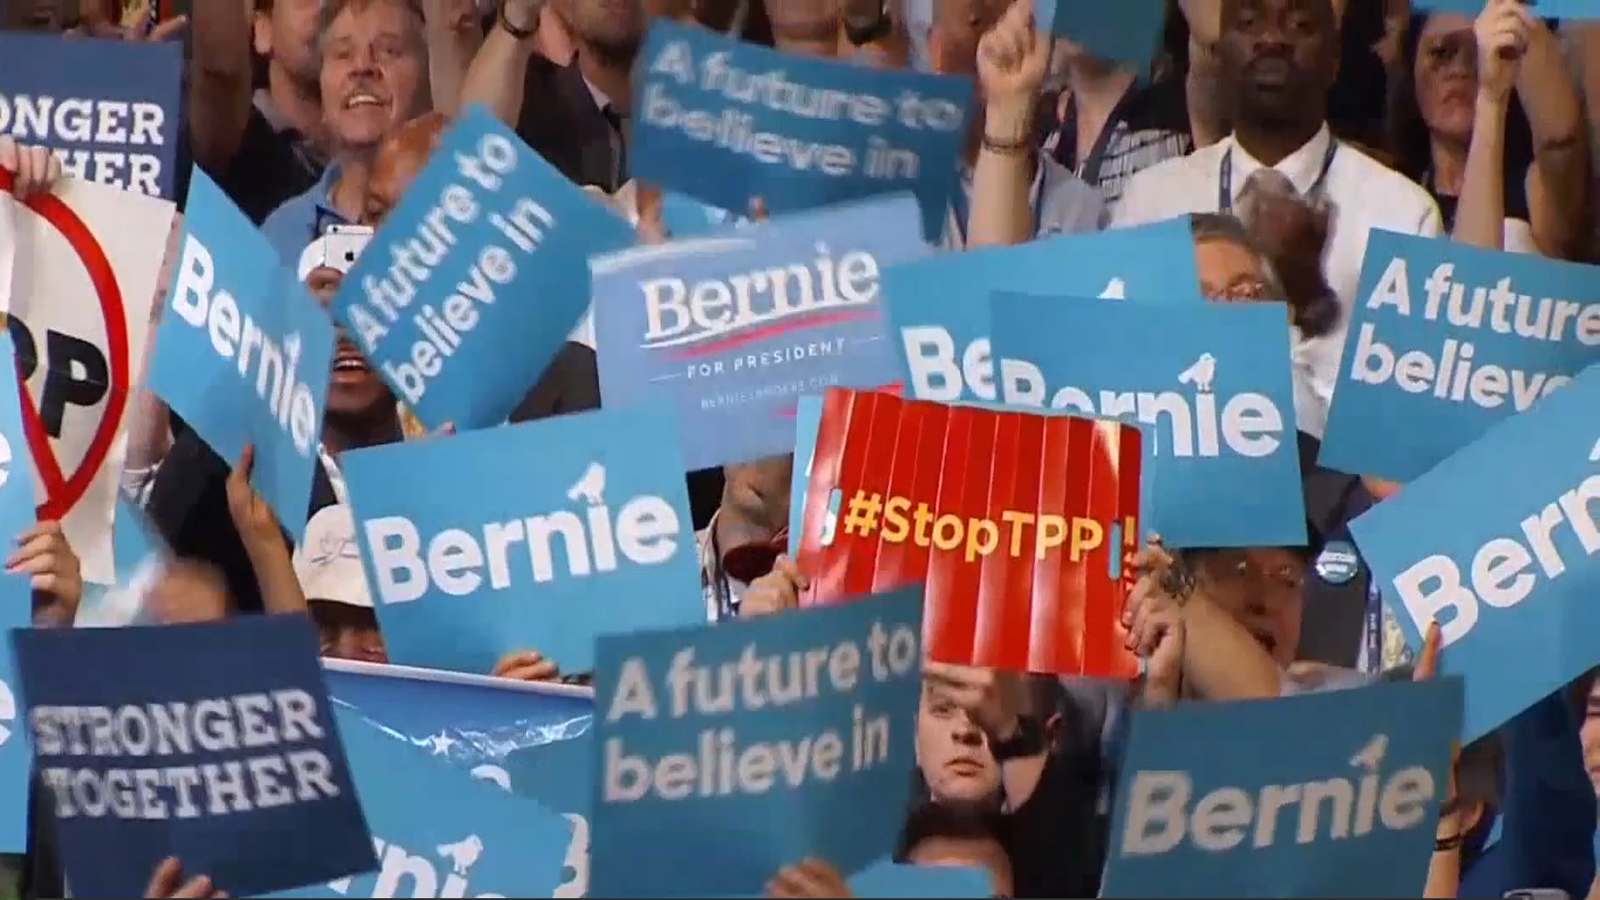 Bernie Sanders supporters protest at DNC